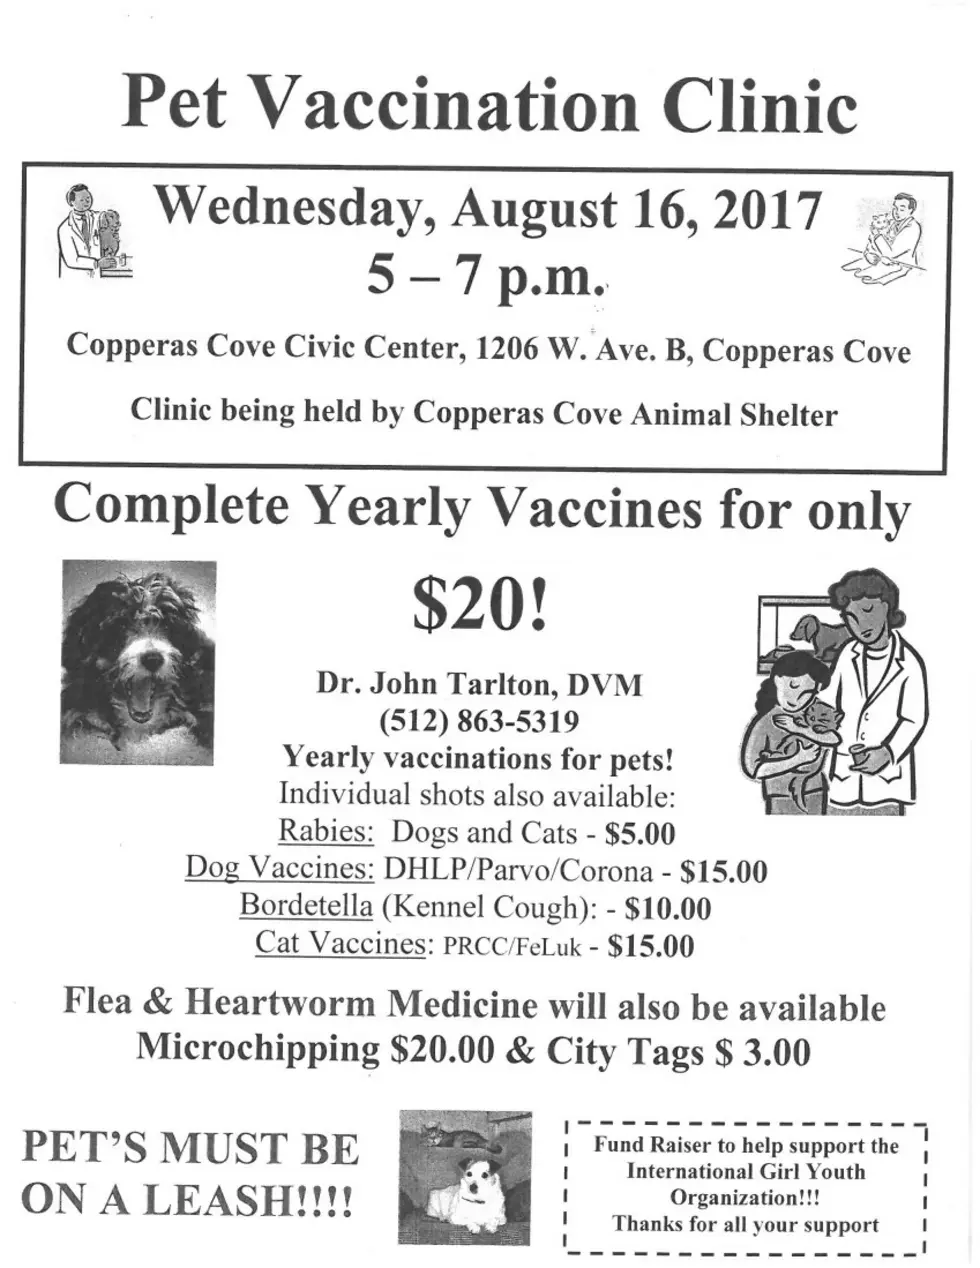 Copperas Cove Pet Vaccination Clinic This Wednesday